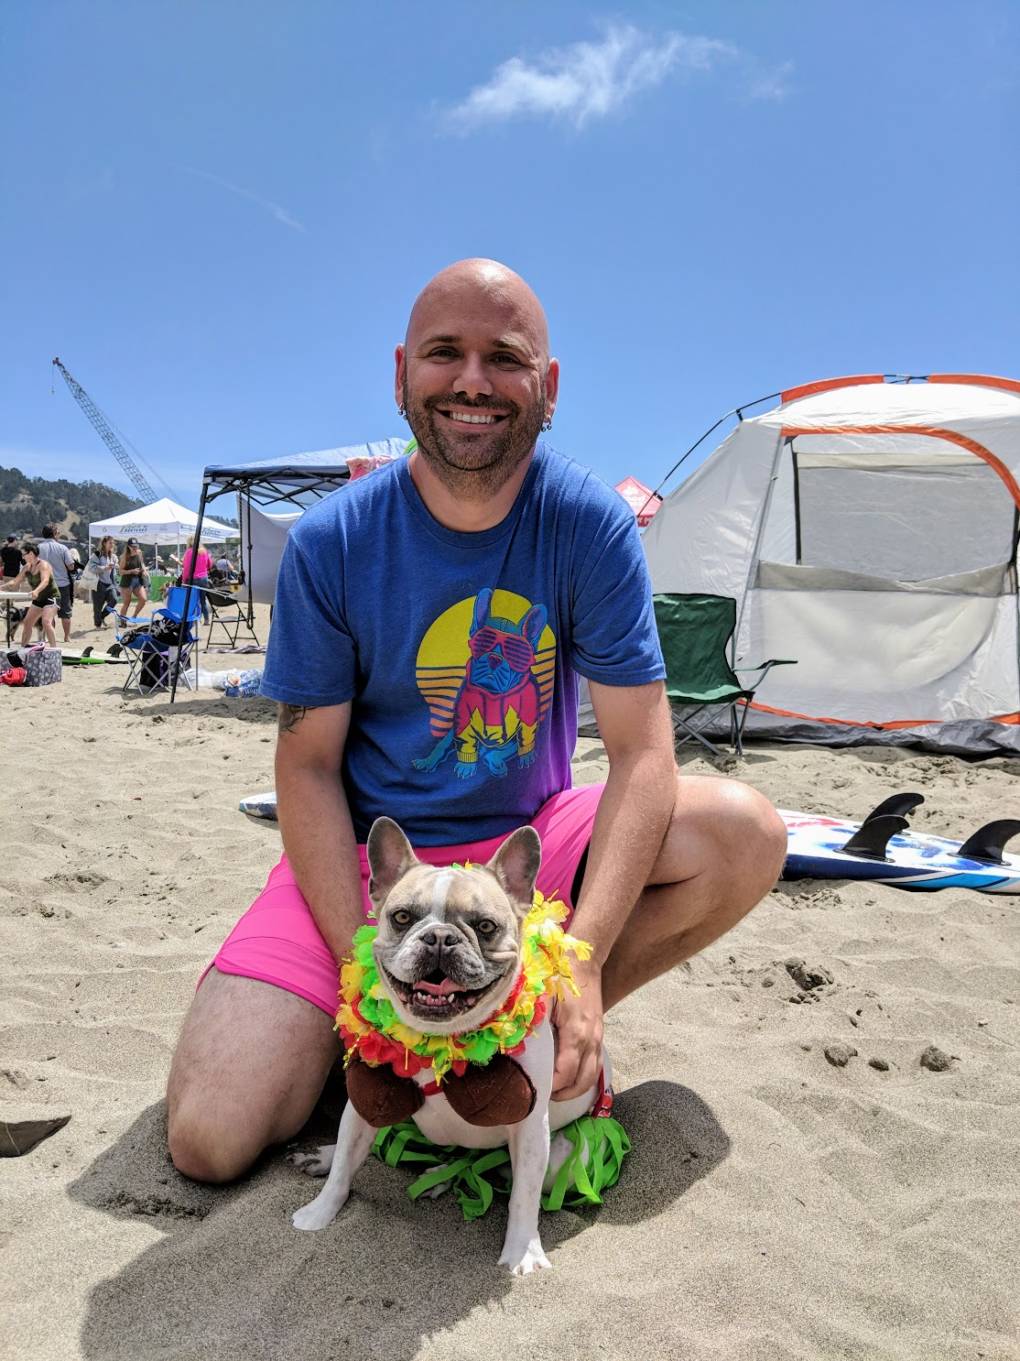 Cherie the French bulldog with his owner Dan Nykolayko, from Orange County. "Unlike most French bulldogs she showed a high interest in the water... Frenchies are not exactly a water dog." 